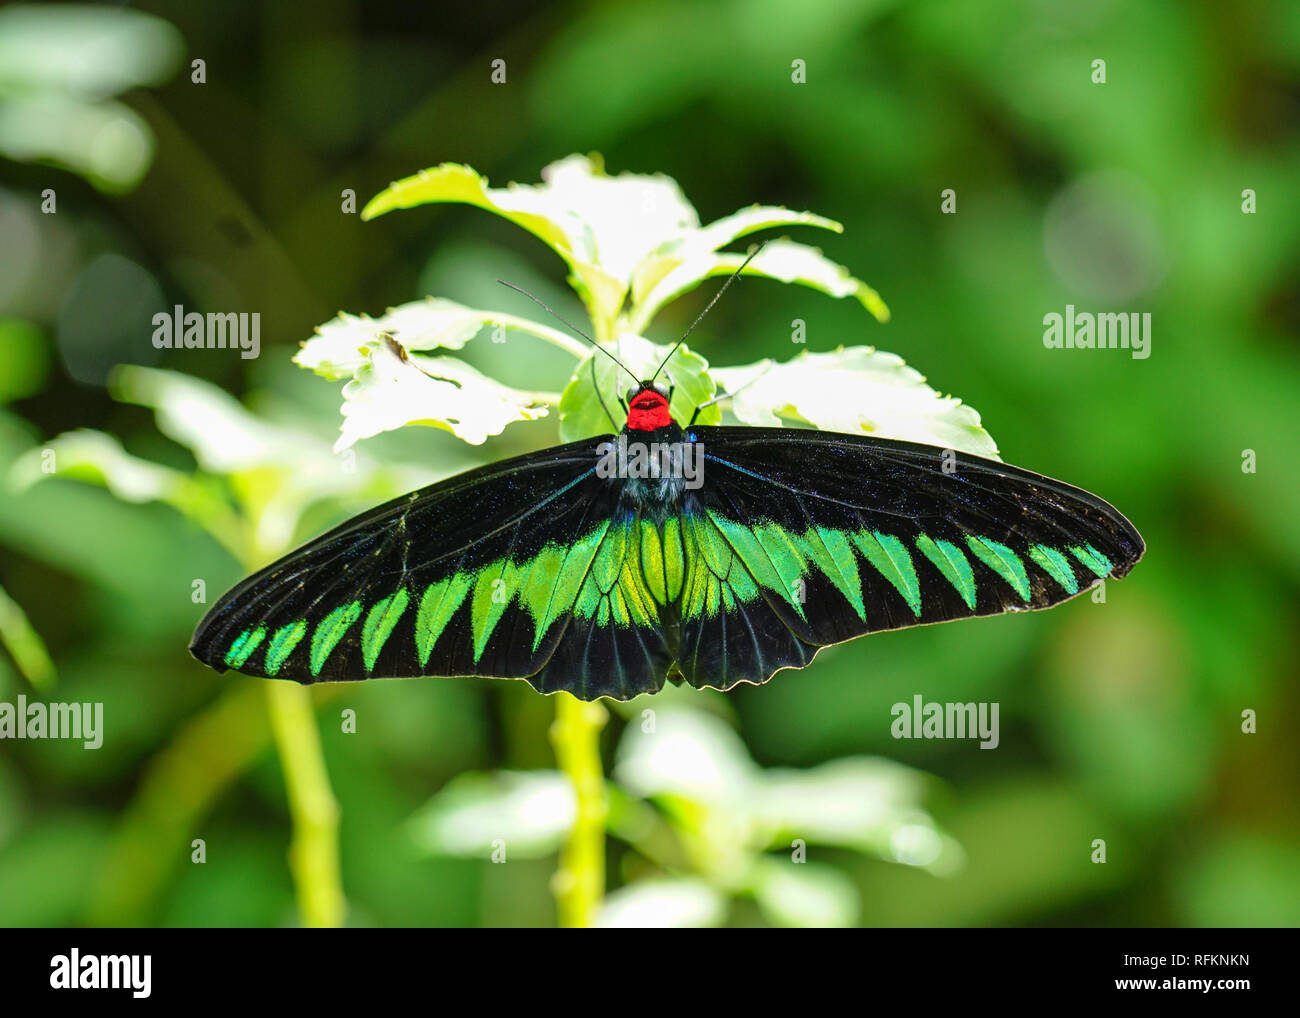 Rajah Brooke butterfly found in a garden Stock Photo - Alamy